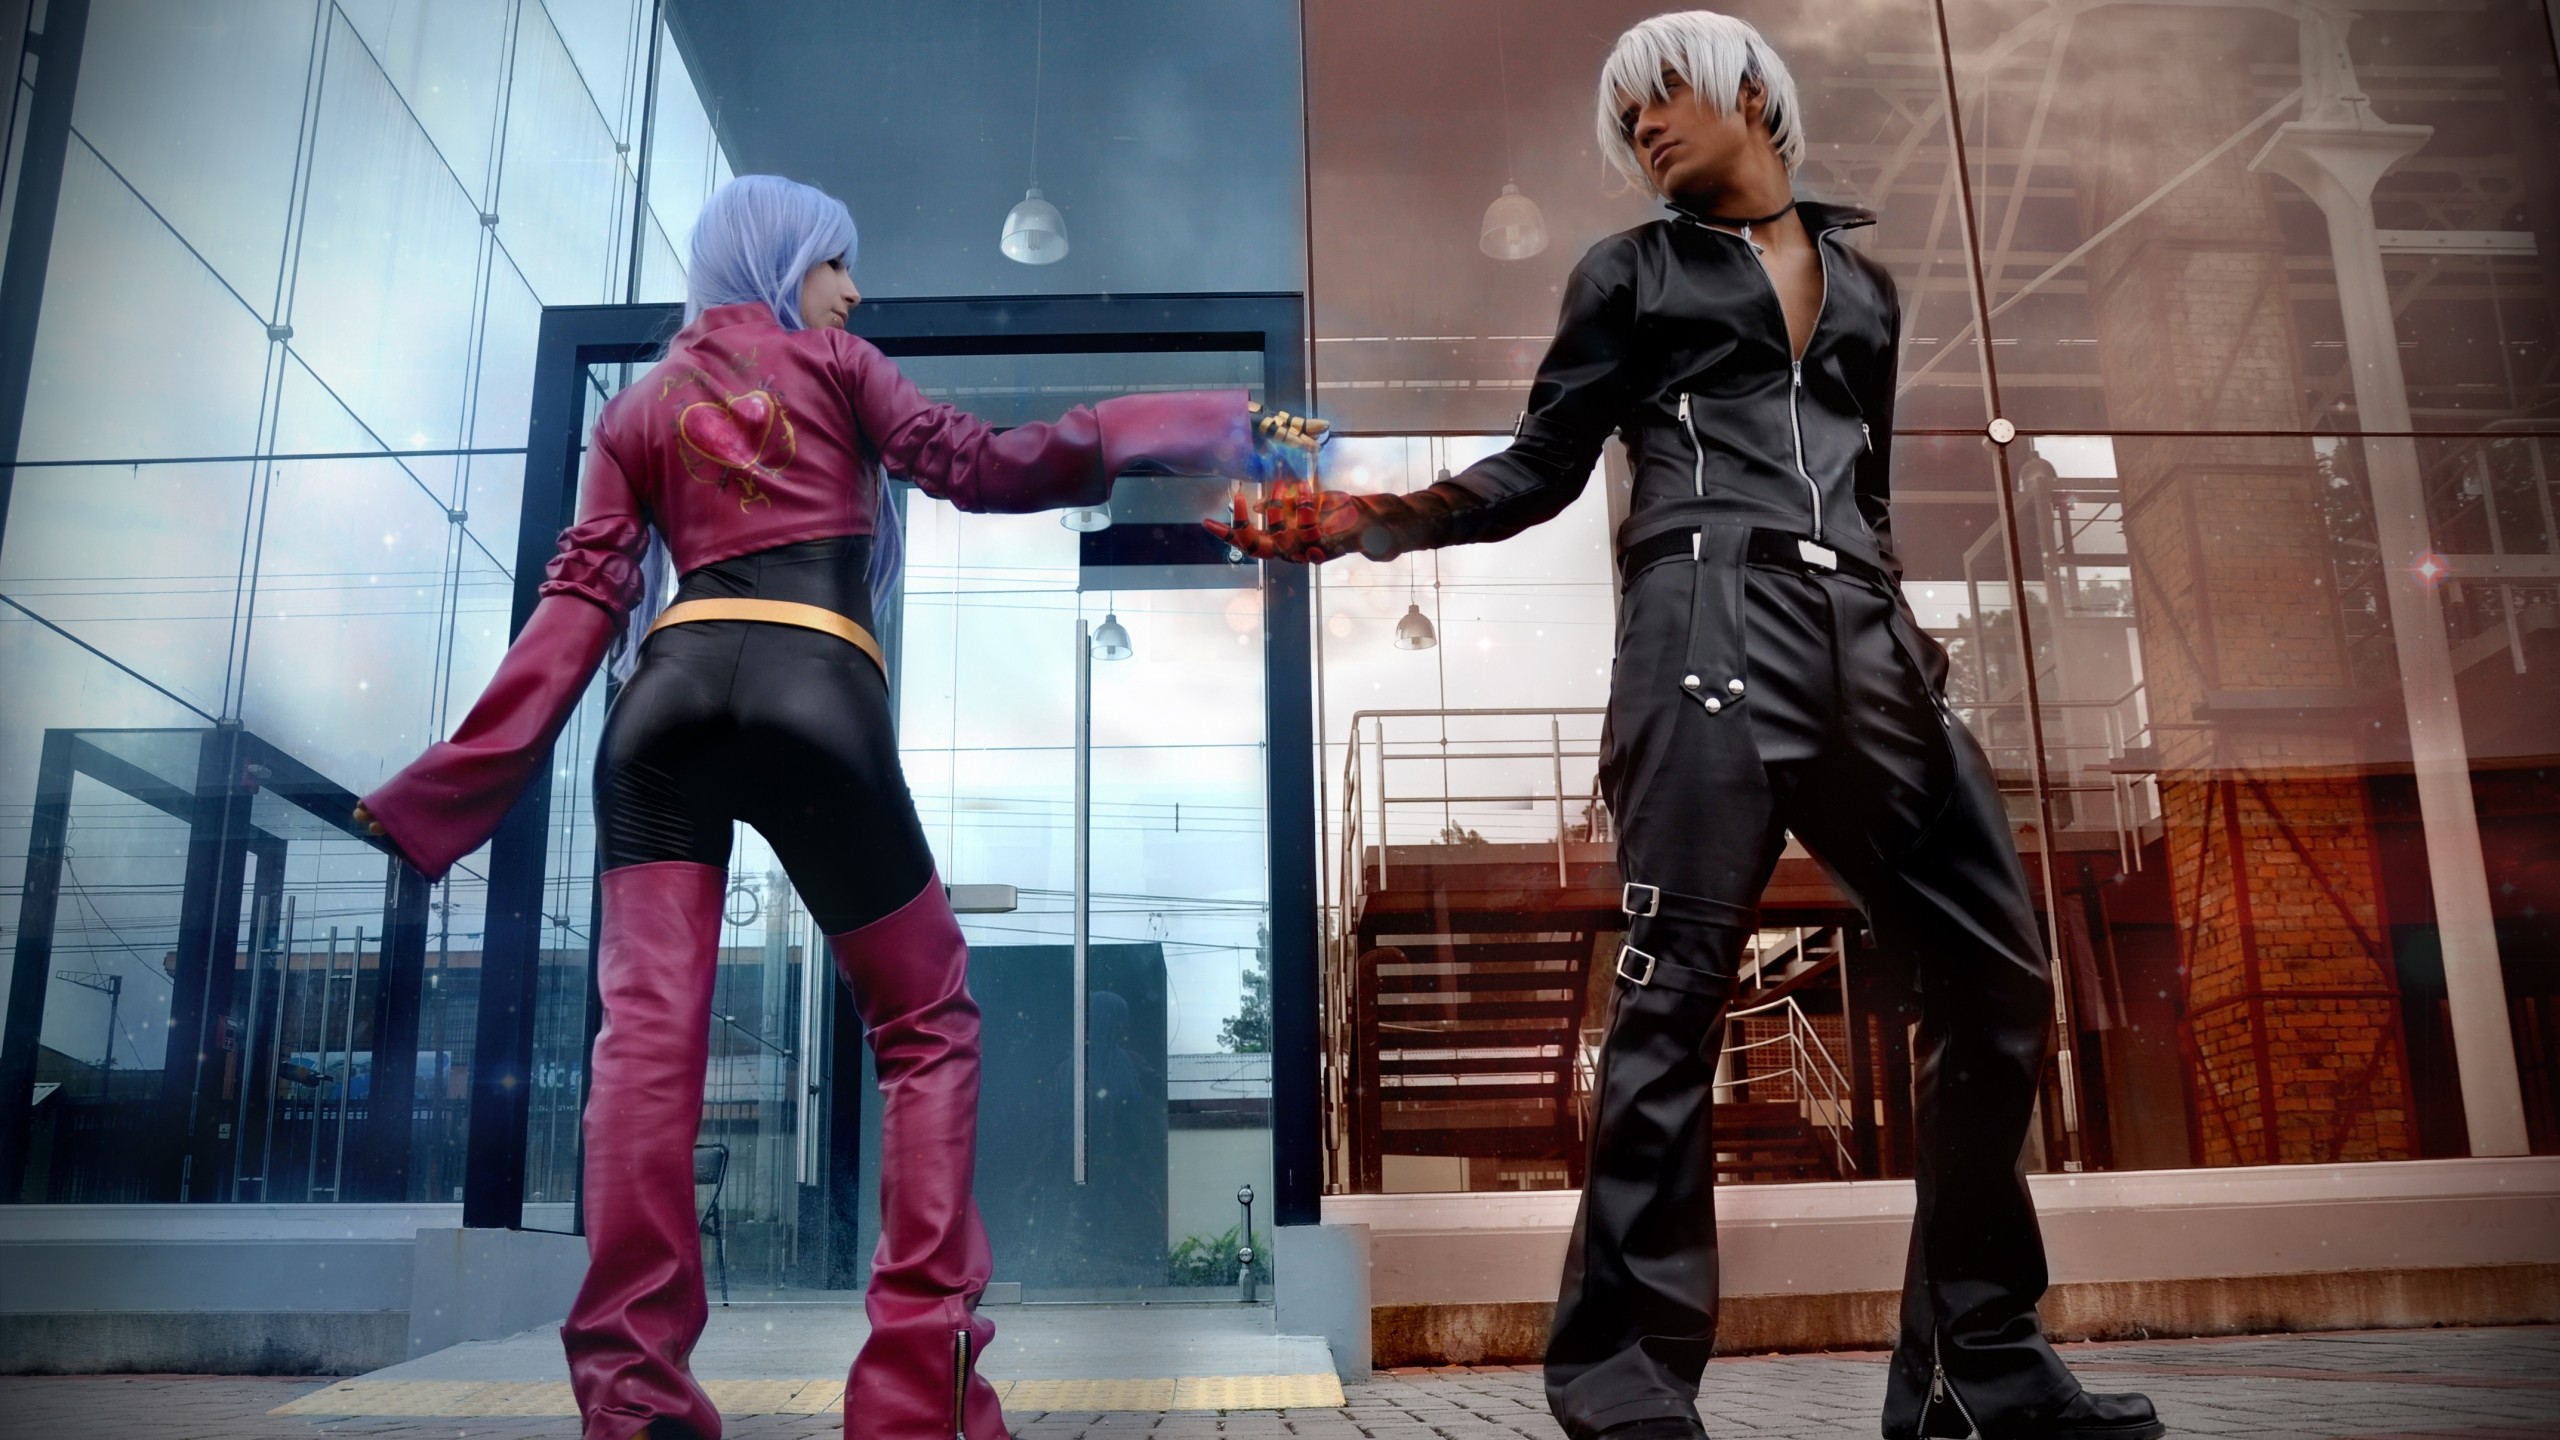 2560x1440  HD wallpaper of a Kula Diamond and K cosplay from the King of  Fighters video game series. Cosplay by Mary Magika and Wilberth Avendano.